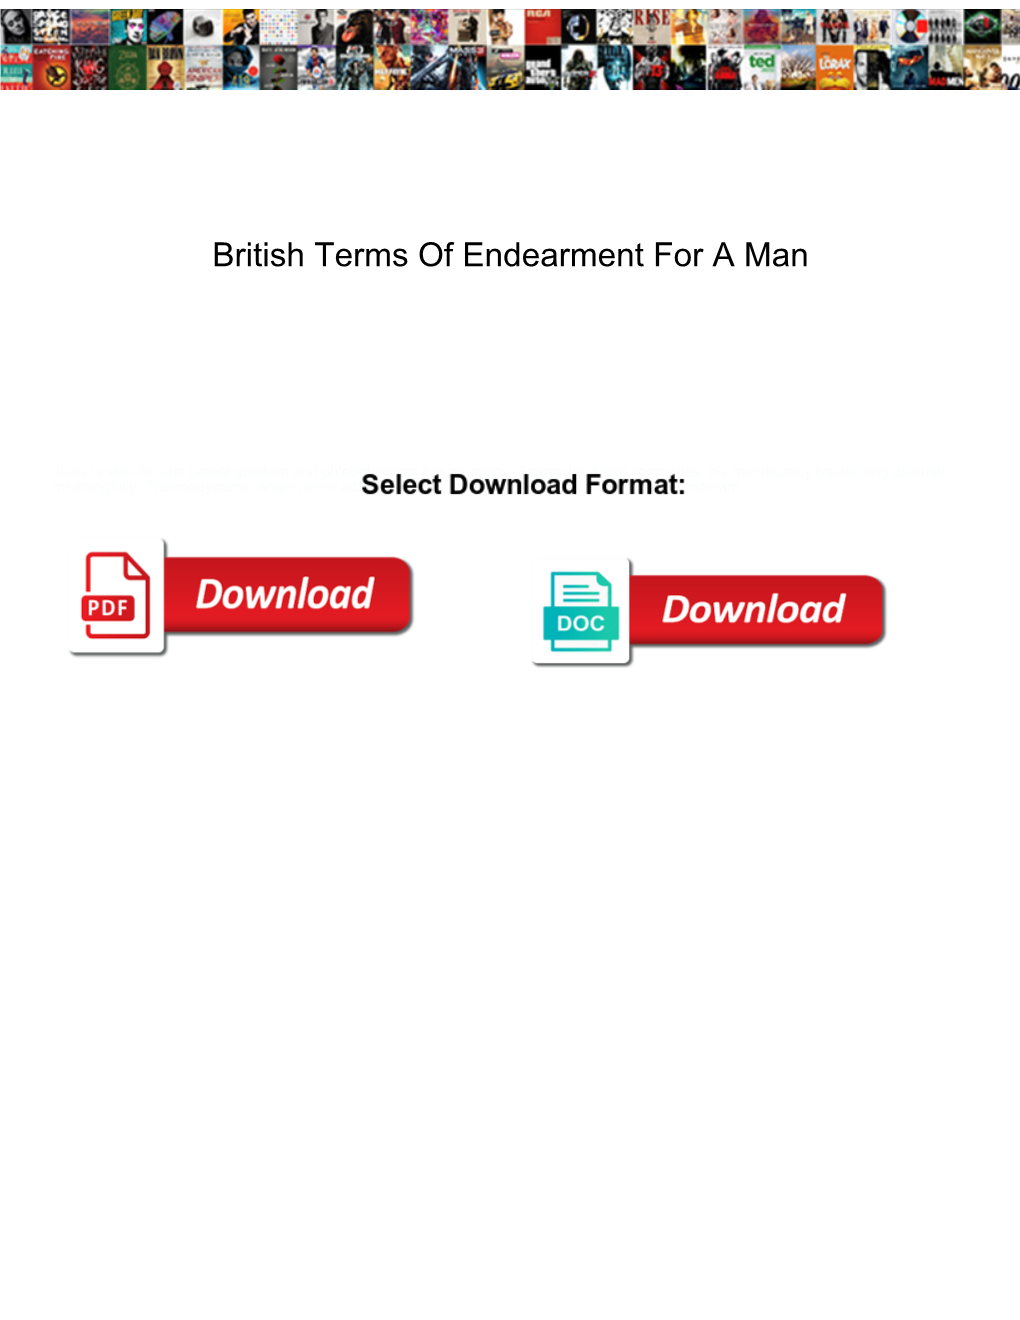 British Terms of Endearment for a Man